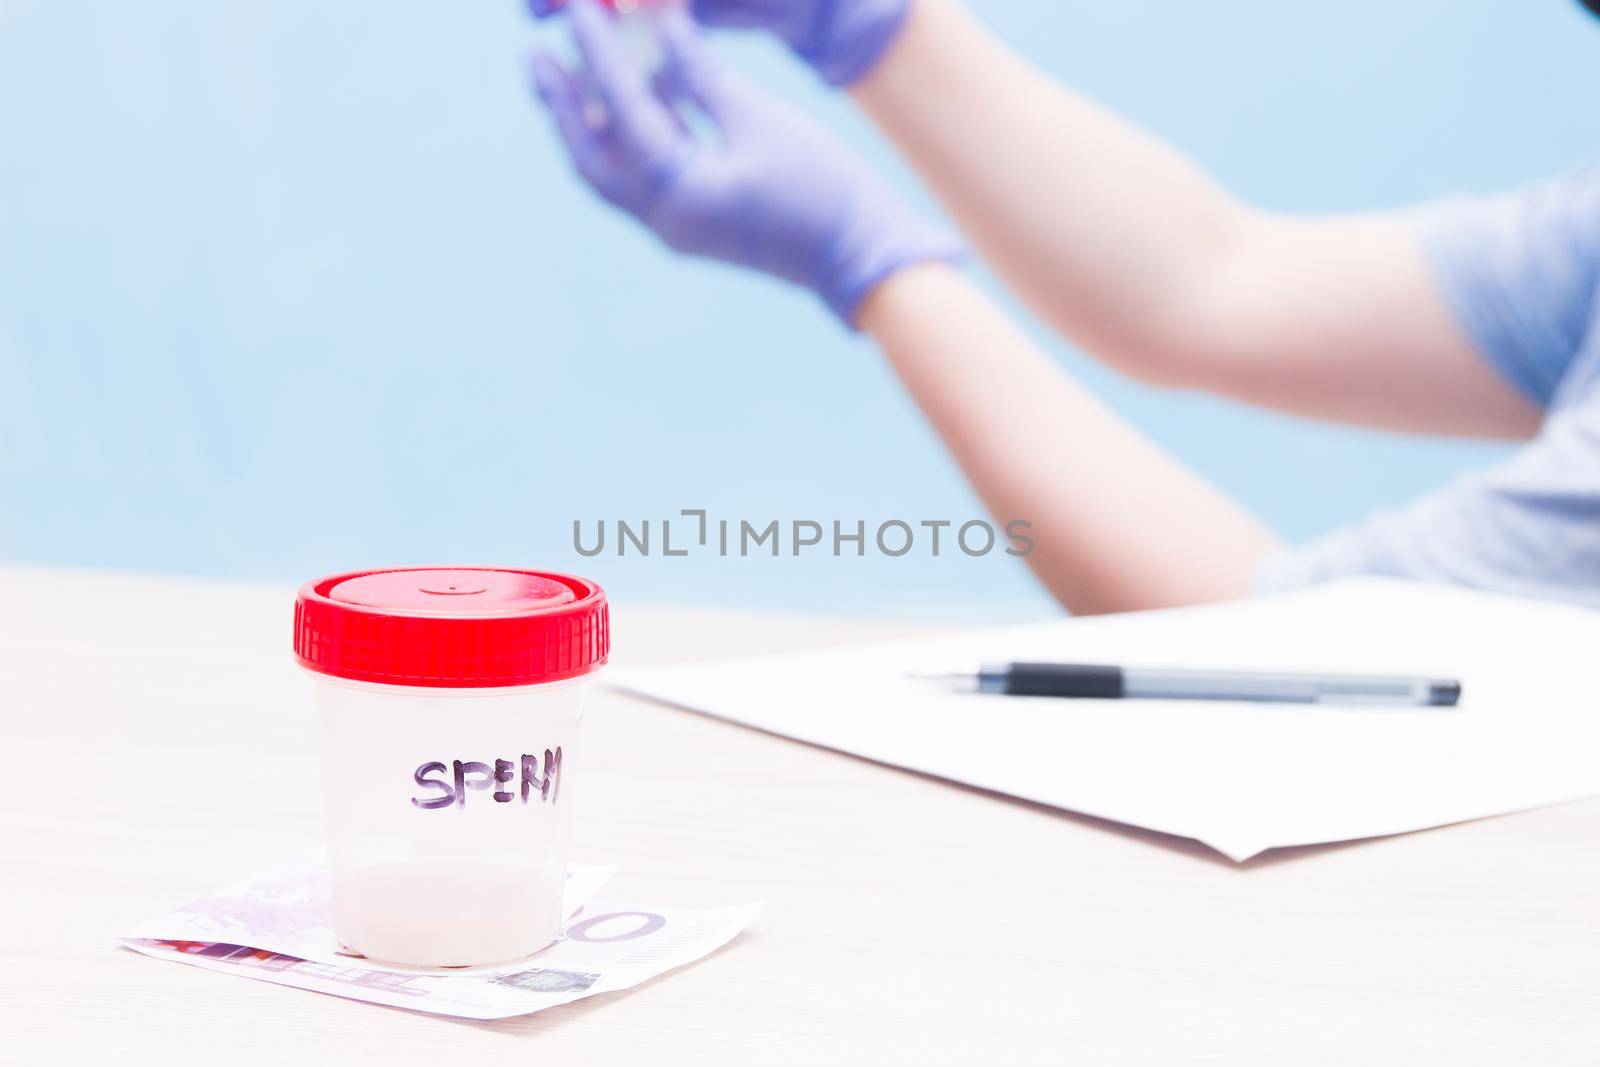 a jar with a red lid with sperm, stand on a banknote of 500 euros, a sperm donor concept, female hands with a jar for analysis on a blue pan in blue gloves, blue background, copy space, paper and pen on the table